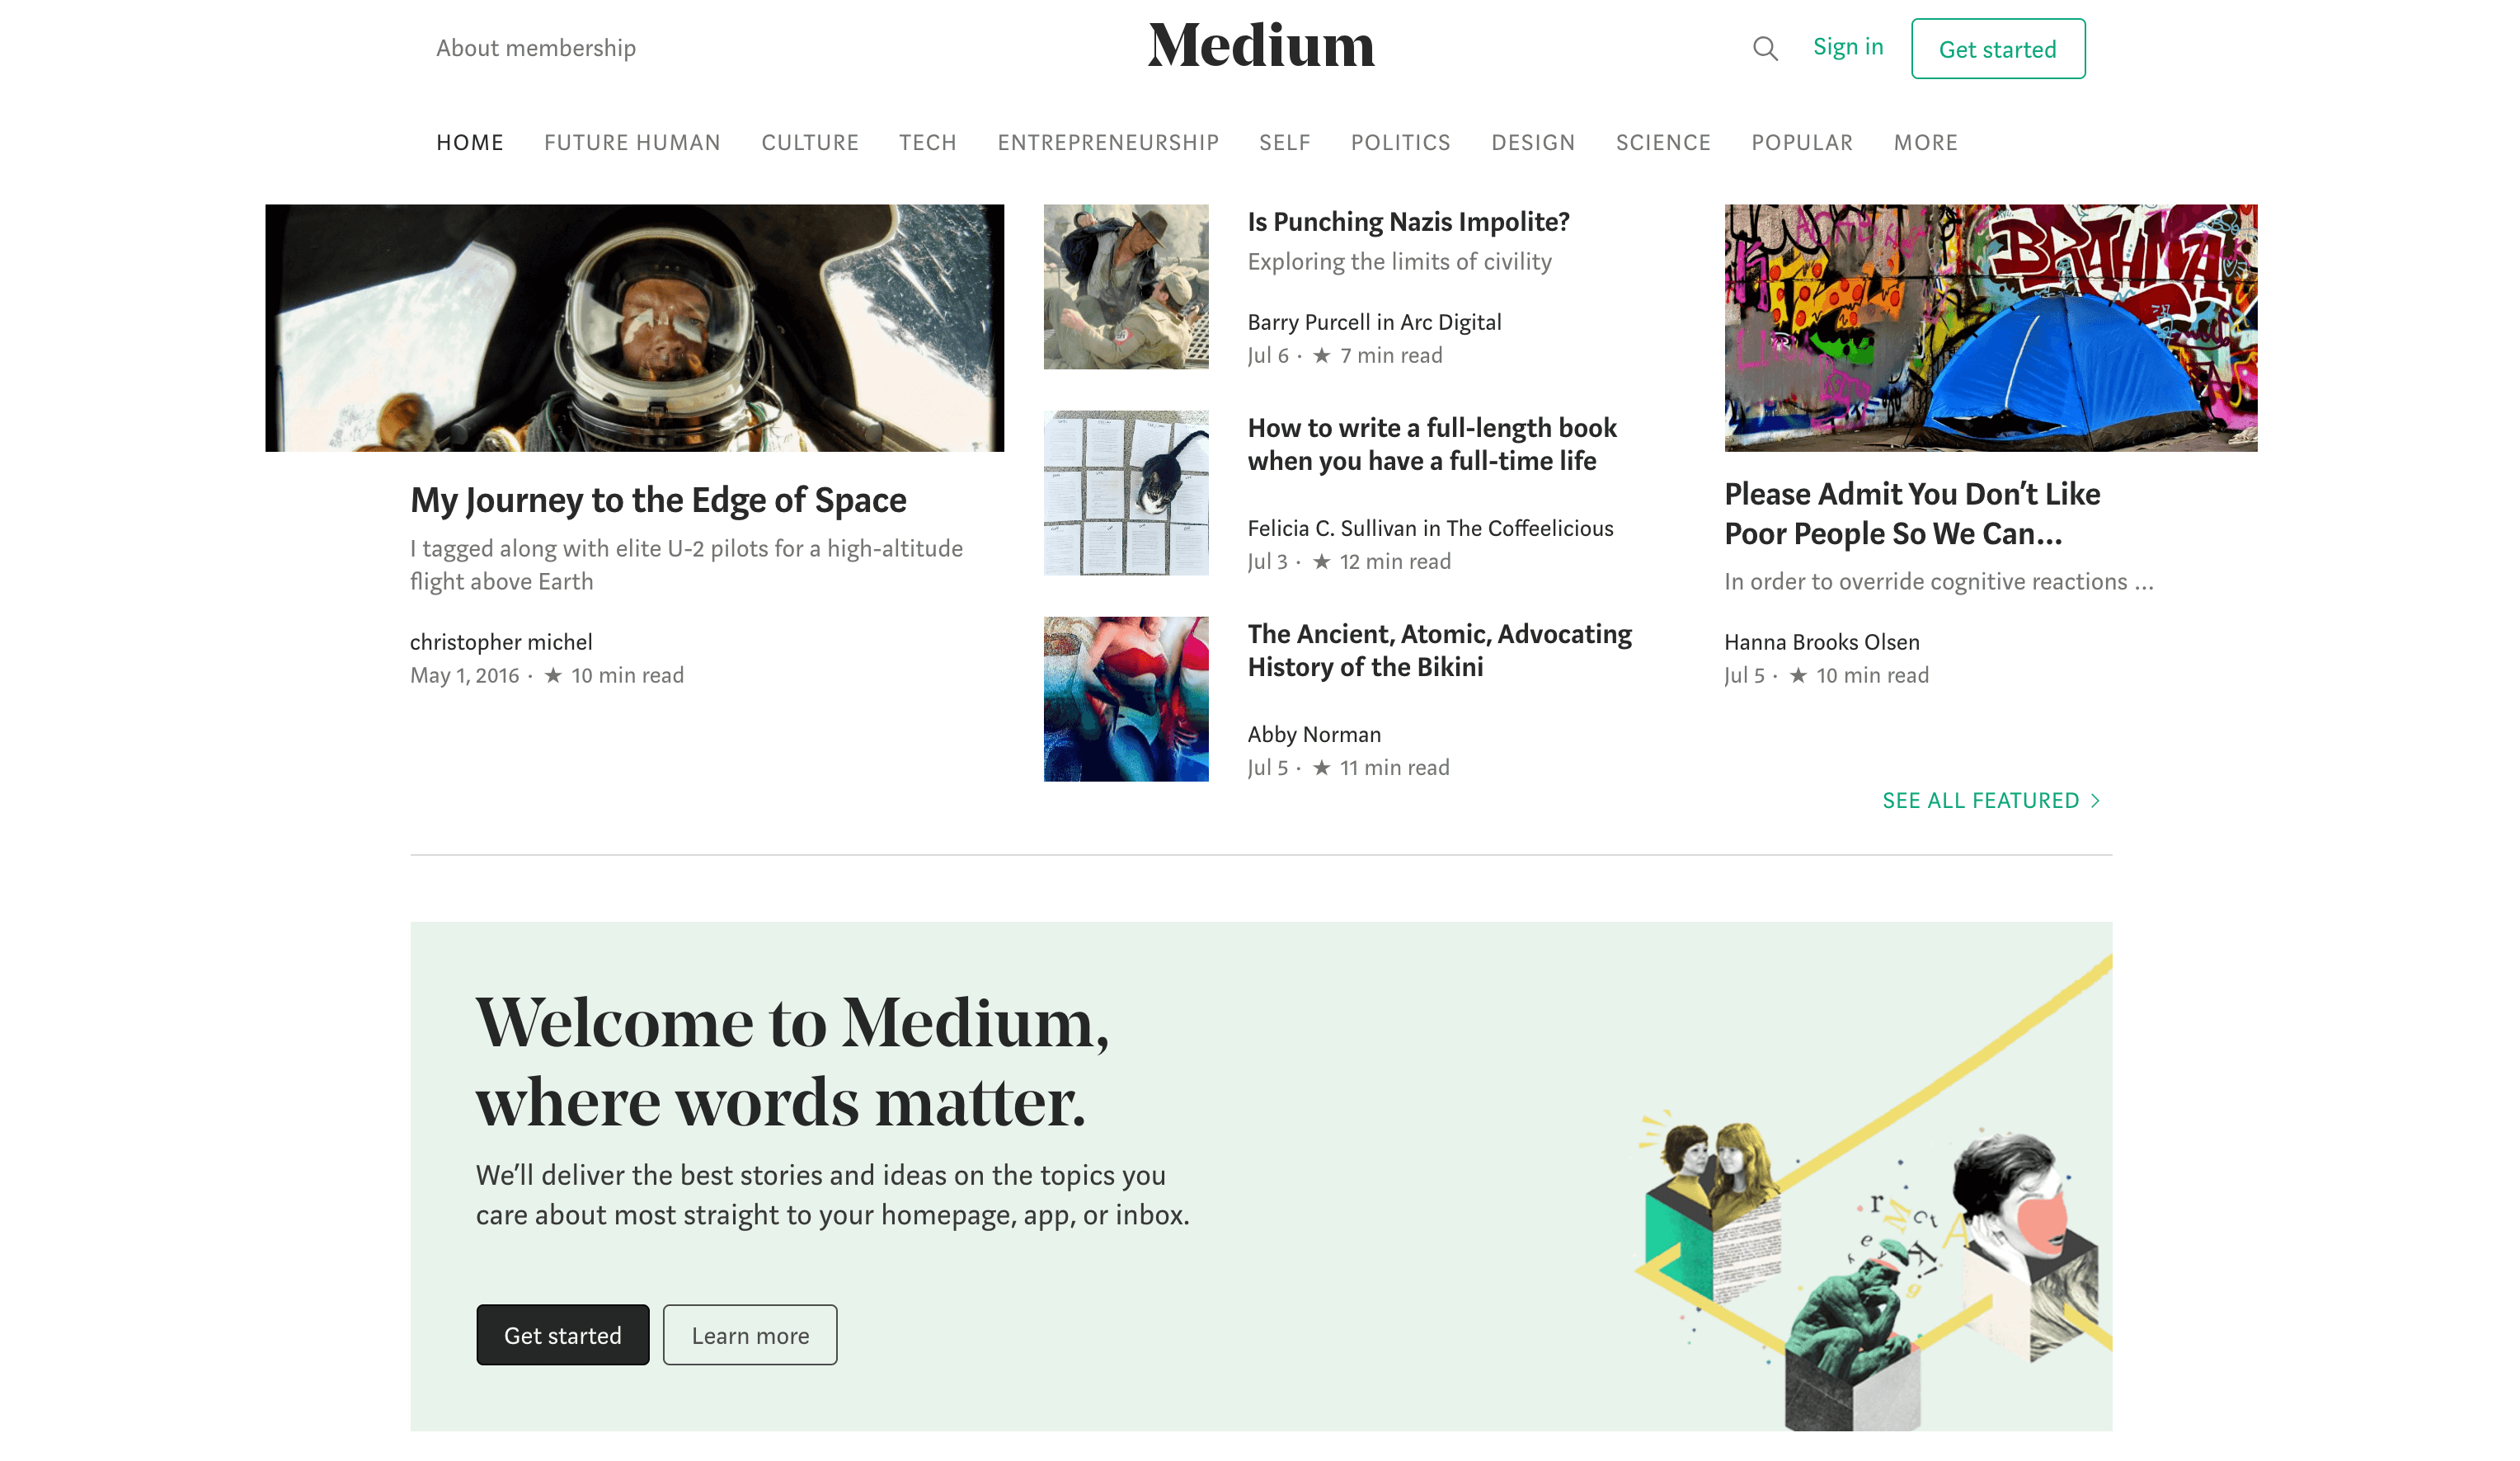 The Medium home page.